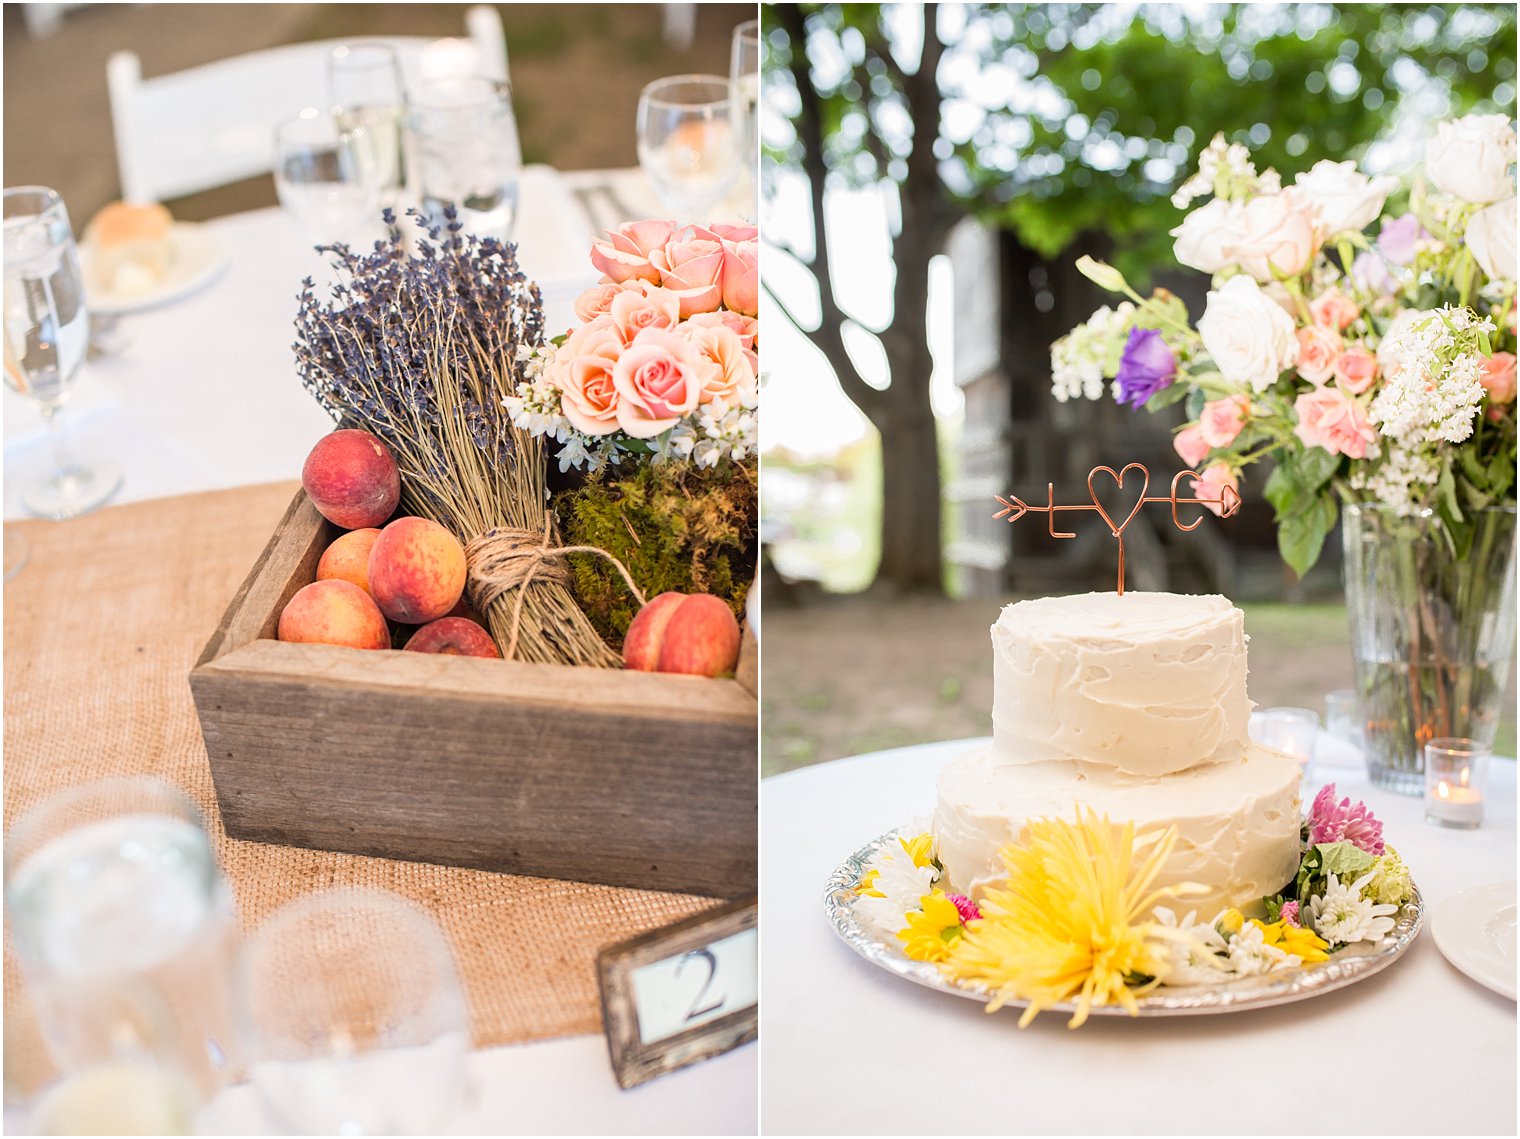 Center pieces and cake at rustic NJ wedding